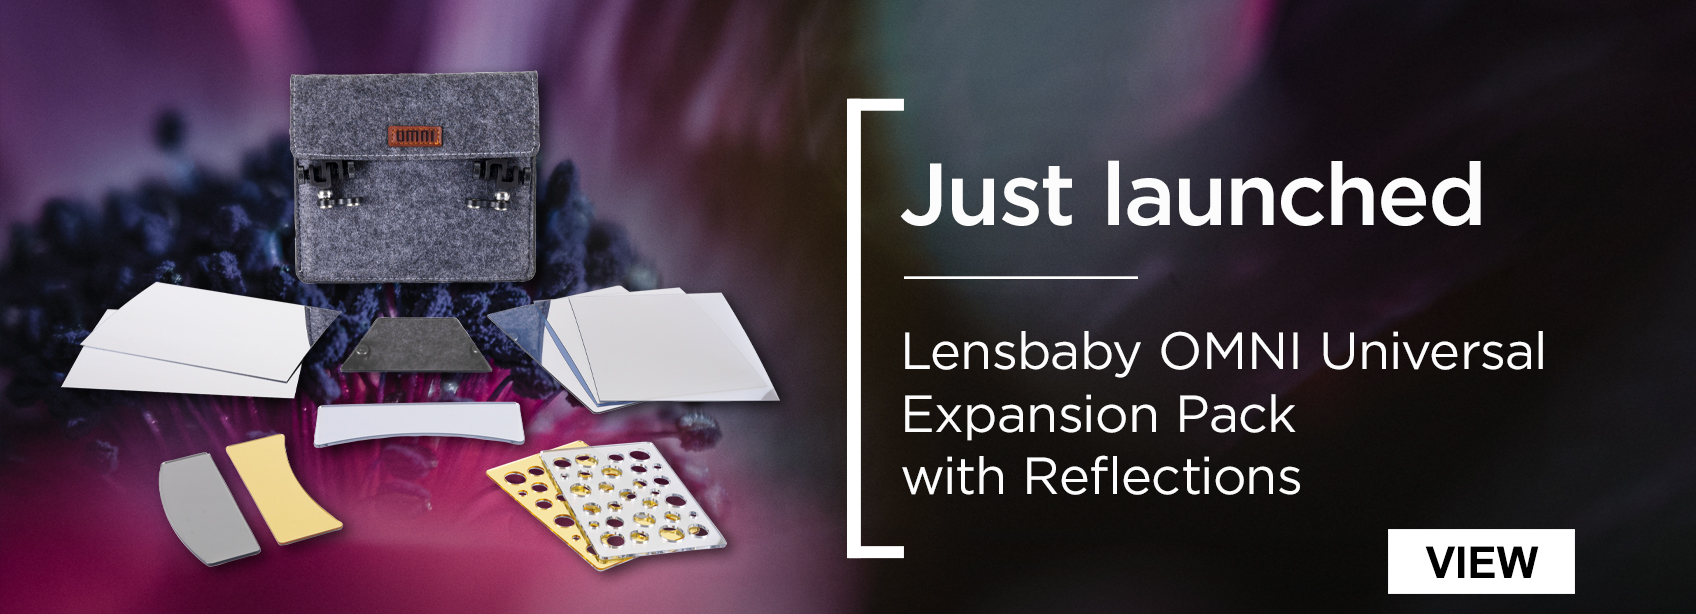 Just launched - Lensbaby OMNI Universal Expansion Pack with Reflections